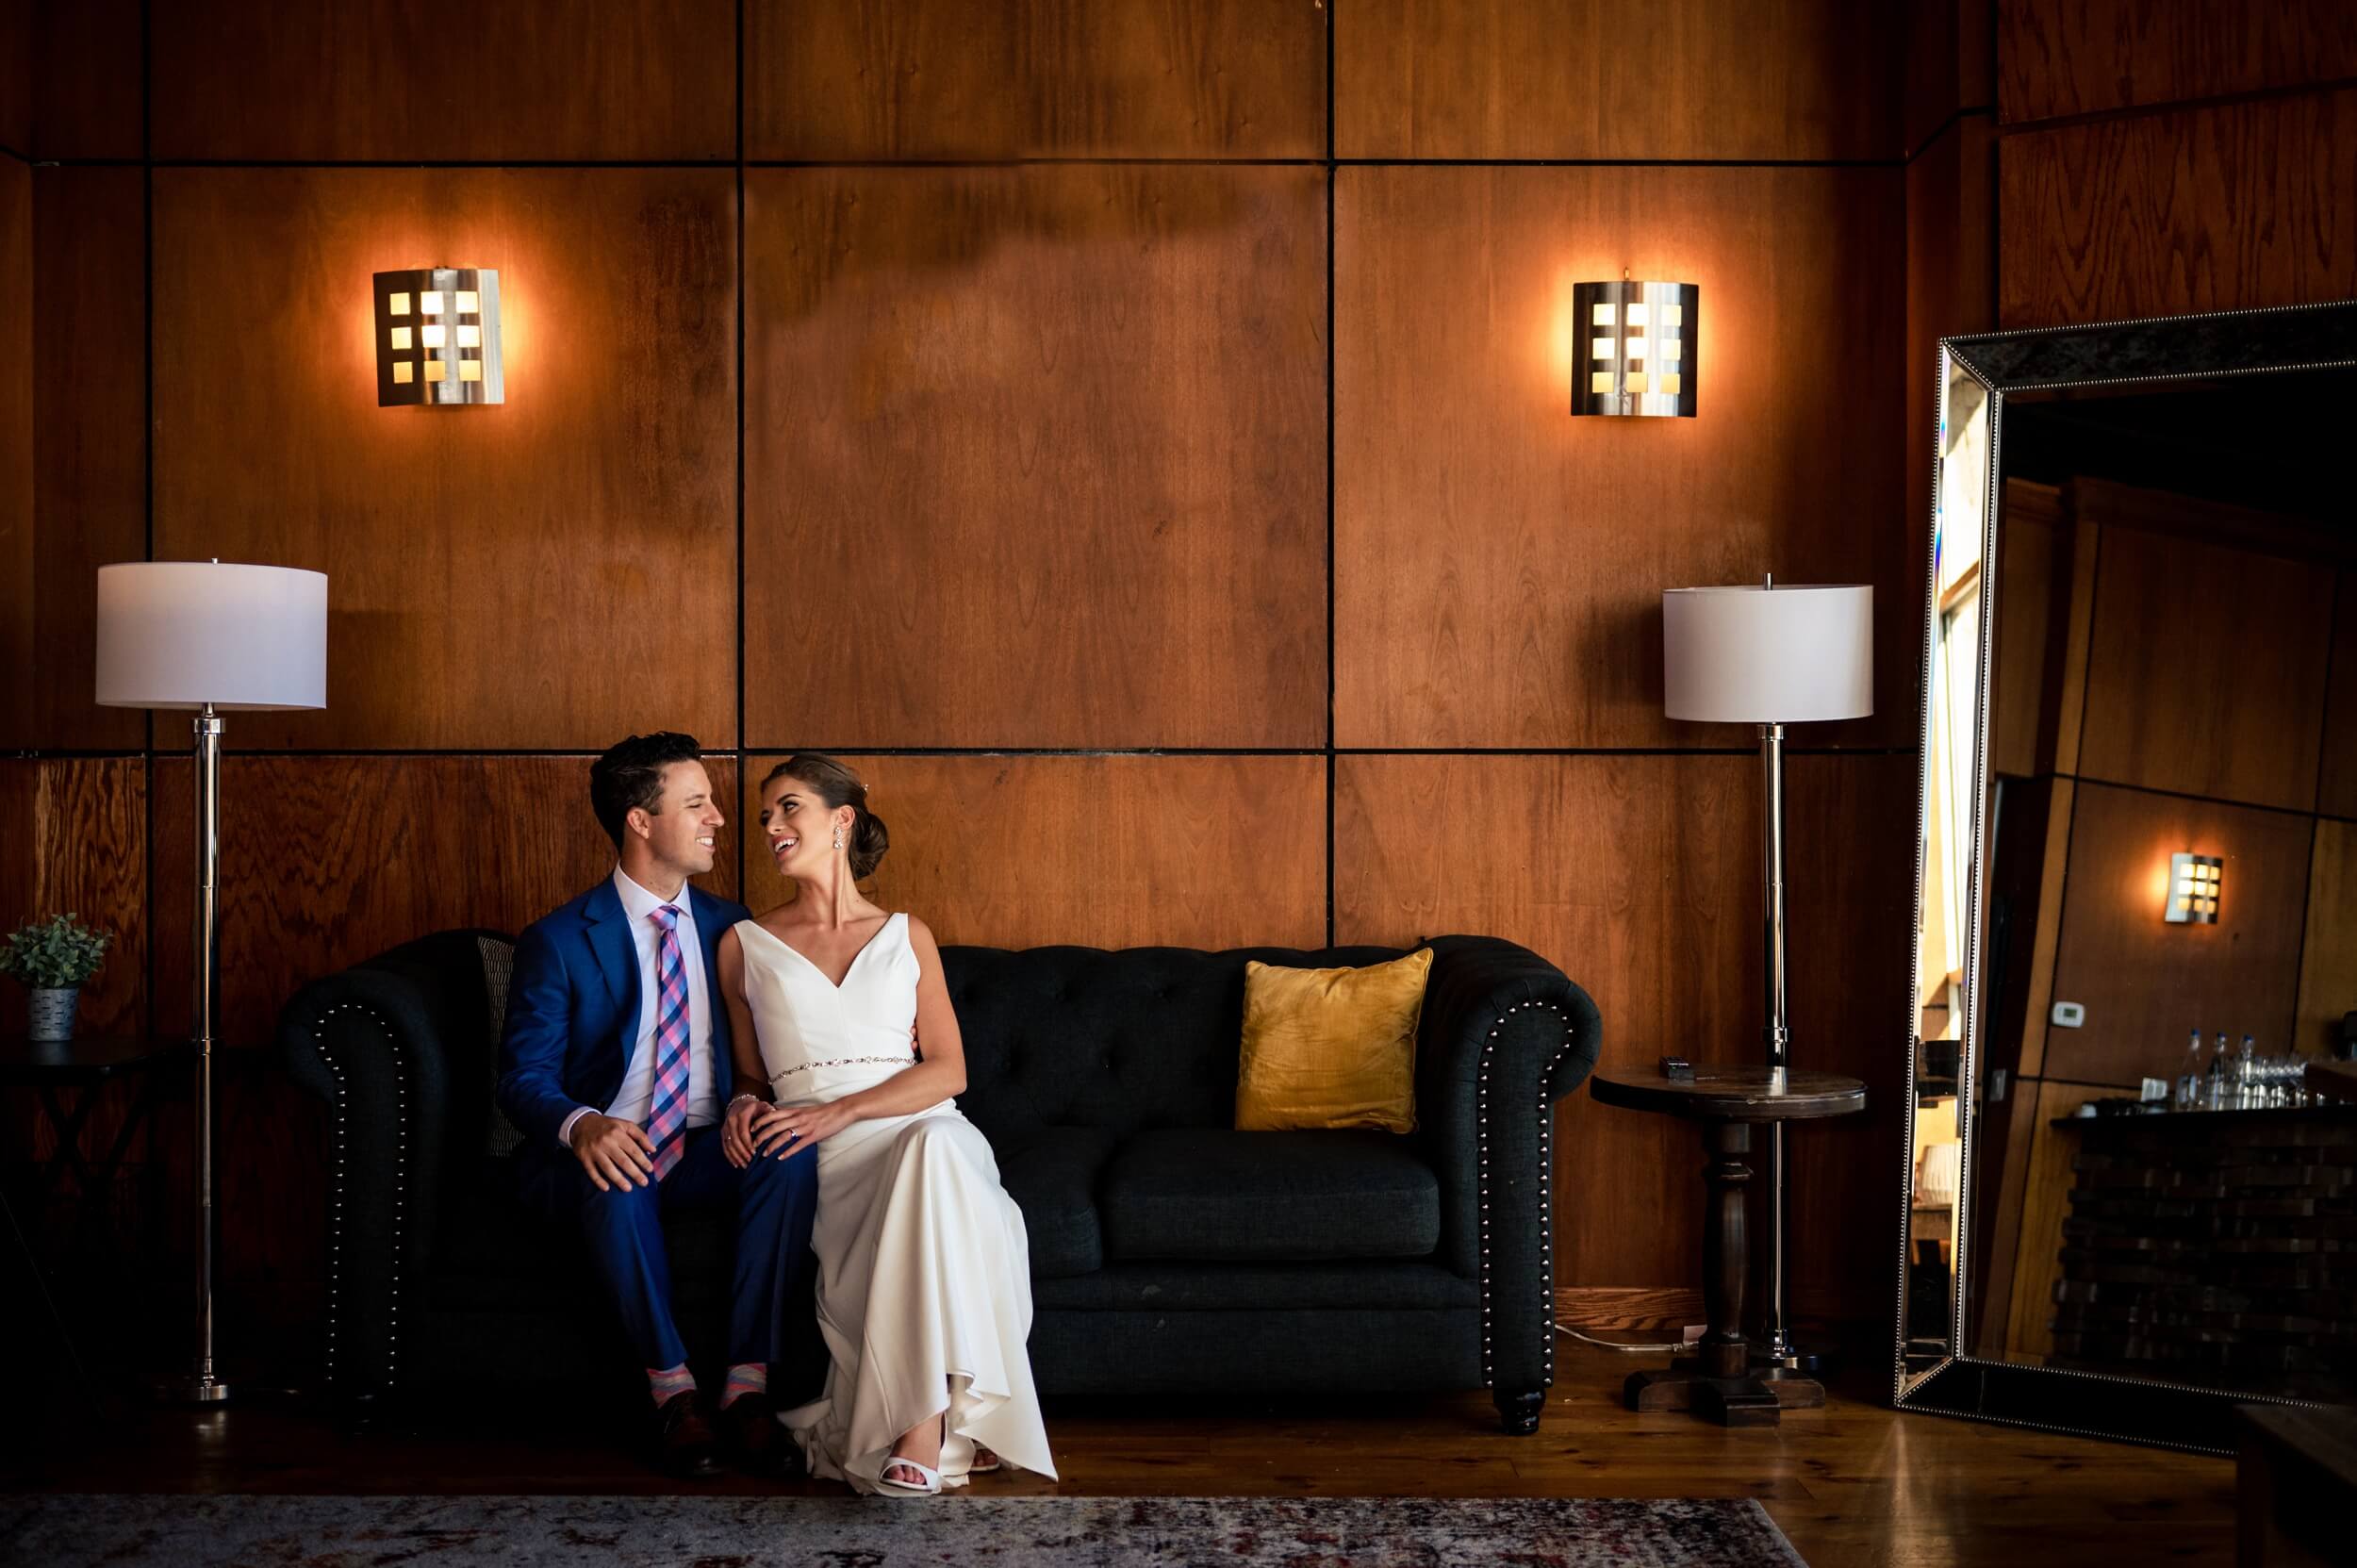 bride and groom relaxing before the ceremony at a washington dc wedding venue